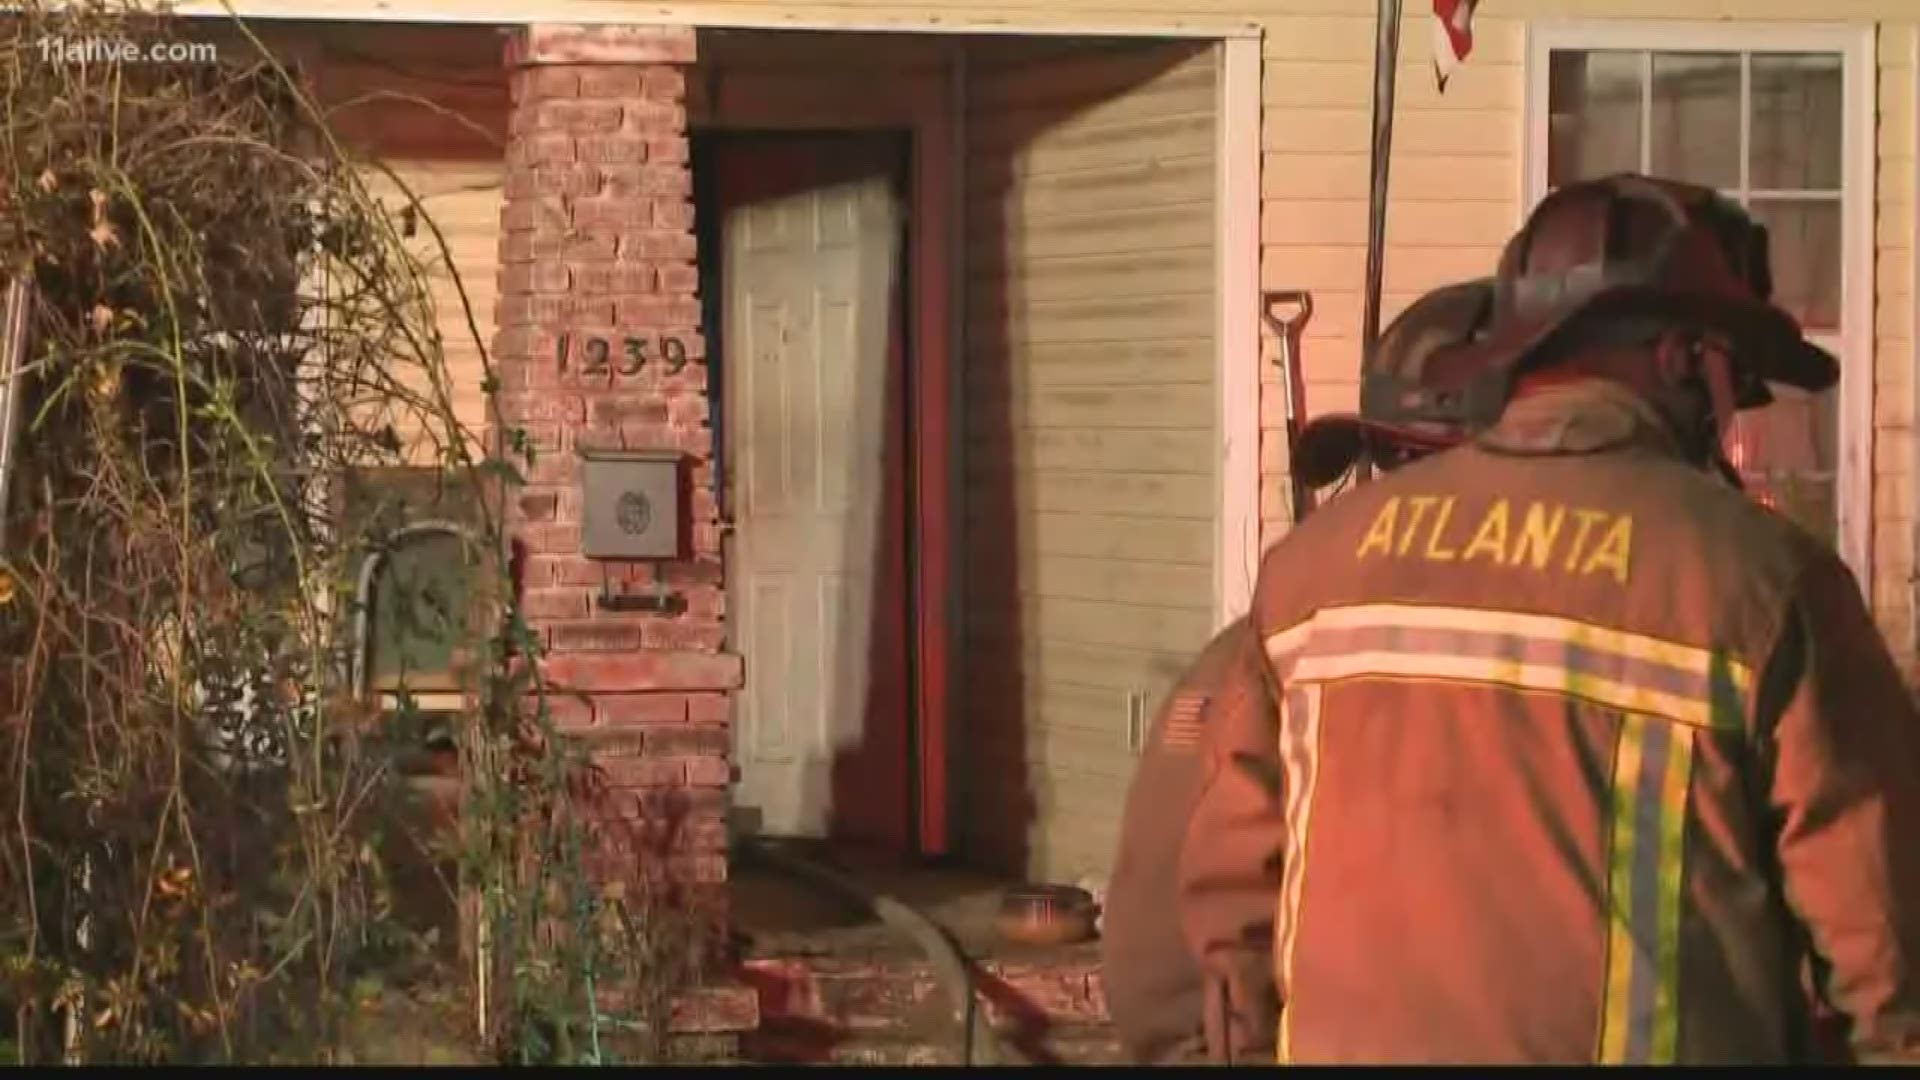 A woman was rescued but is in critical condition after a house fire in Southwest Atlanta on Friday afternoon.